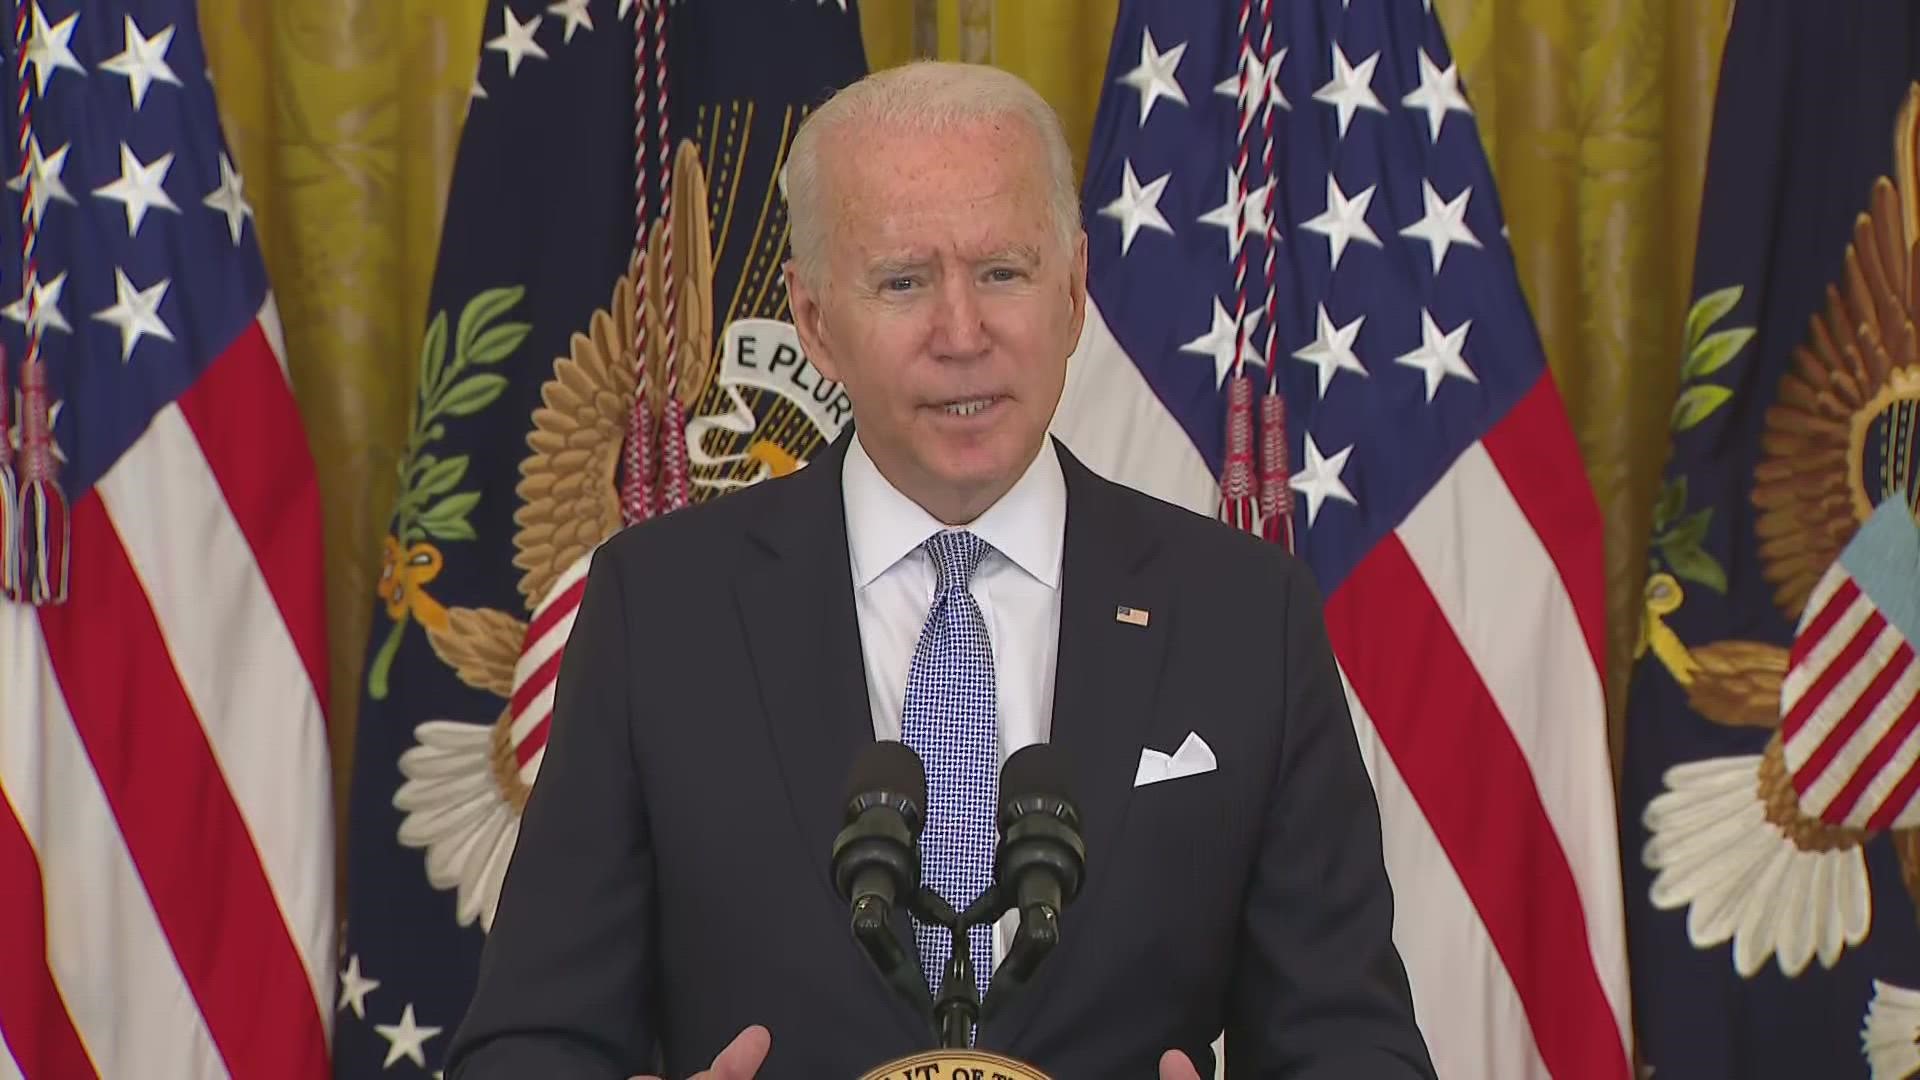 President Joe Biden announced incentives for COVID-19 vaccination Thursday, like expanded paid time off, and asking states to pay anyone who gets vaccinated $100.